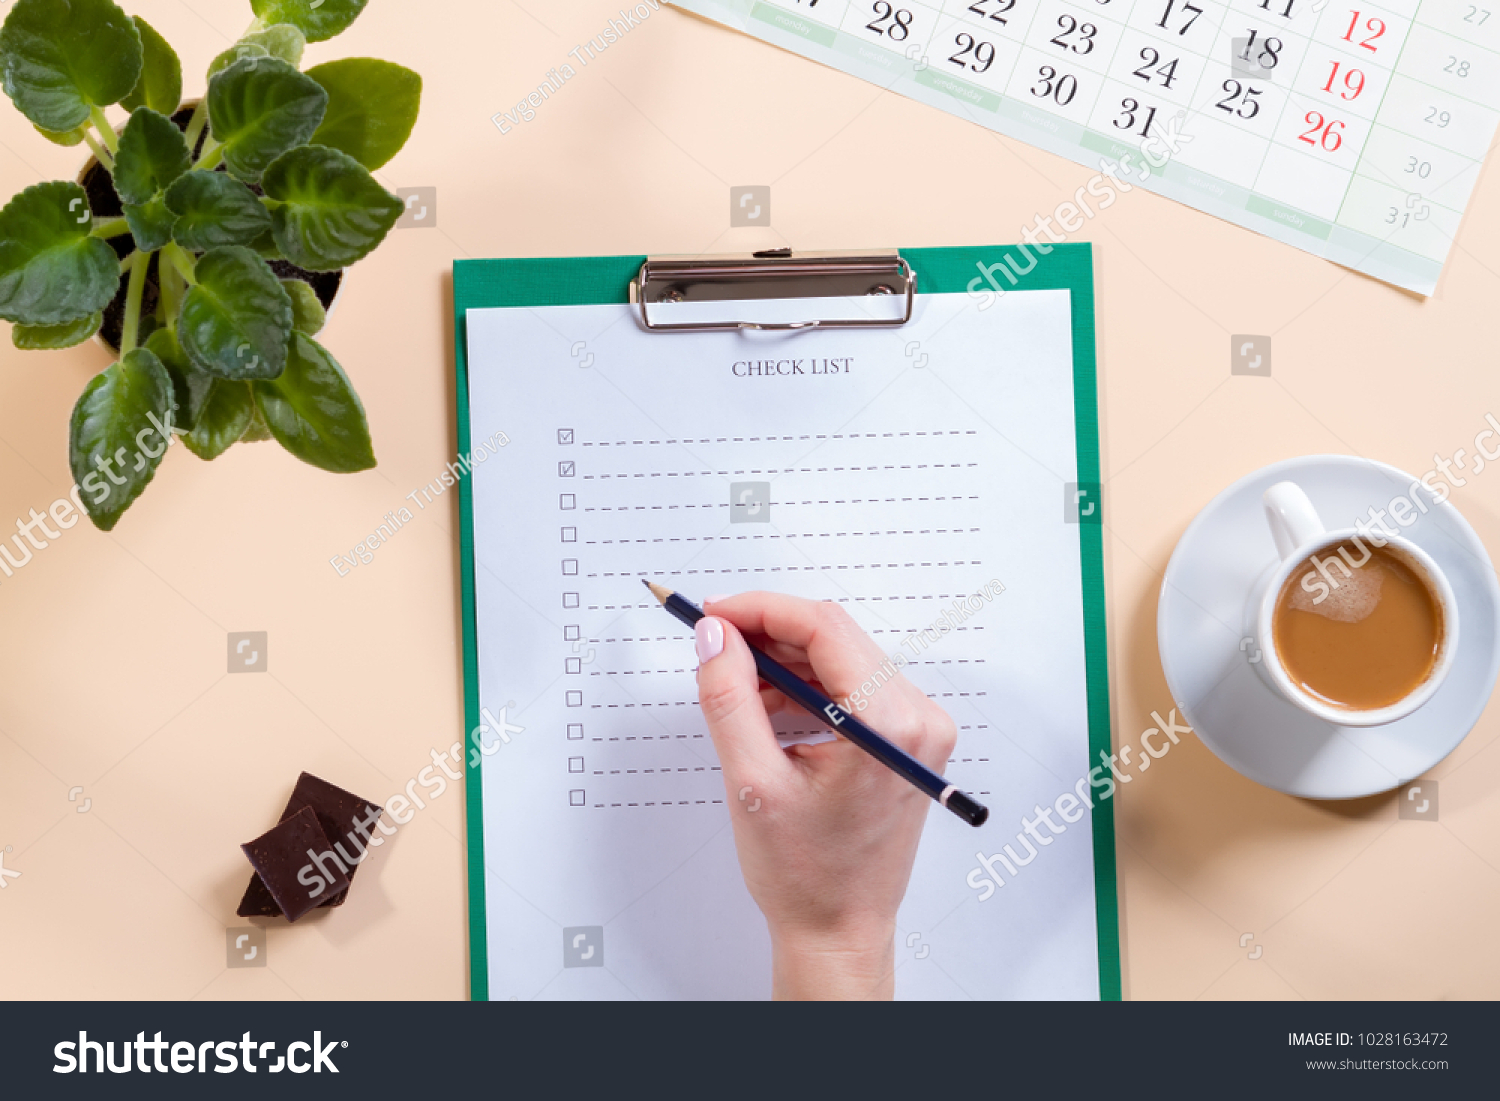 Mockup for check list, empty note paper with pen and coffee cup on light background. Office, writer or study concept. female hand with a pencil #1028163472